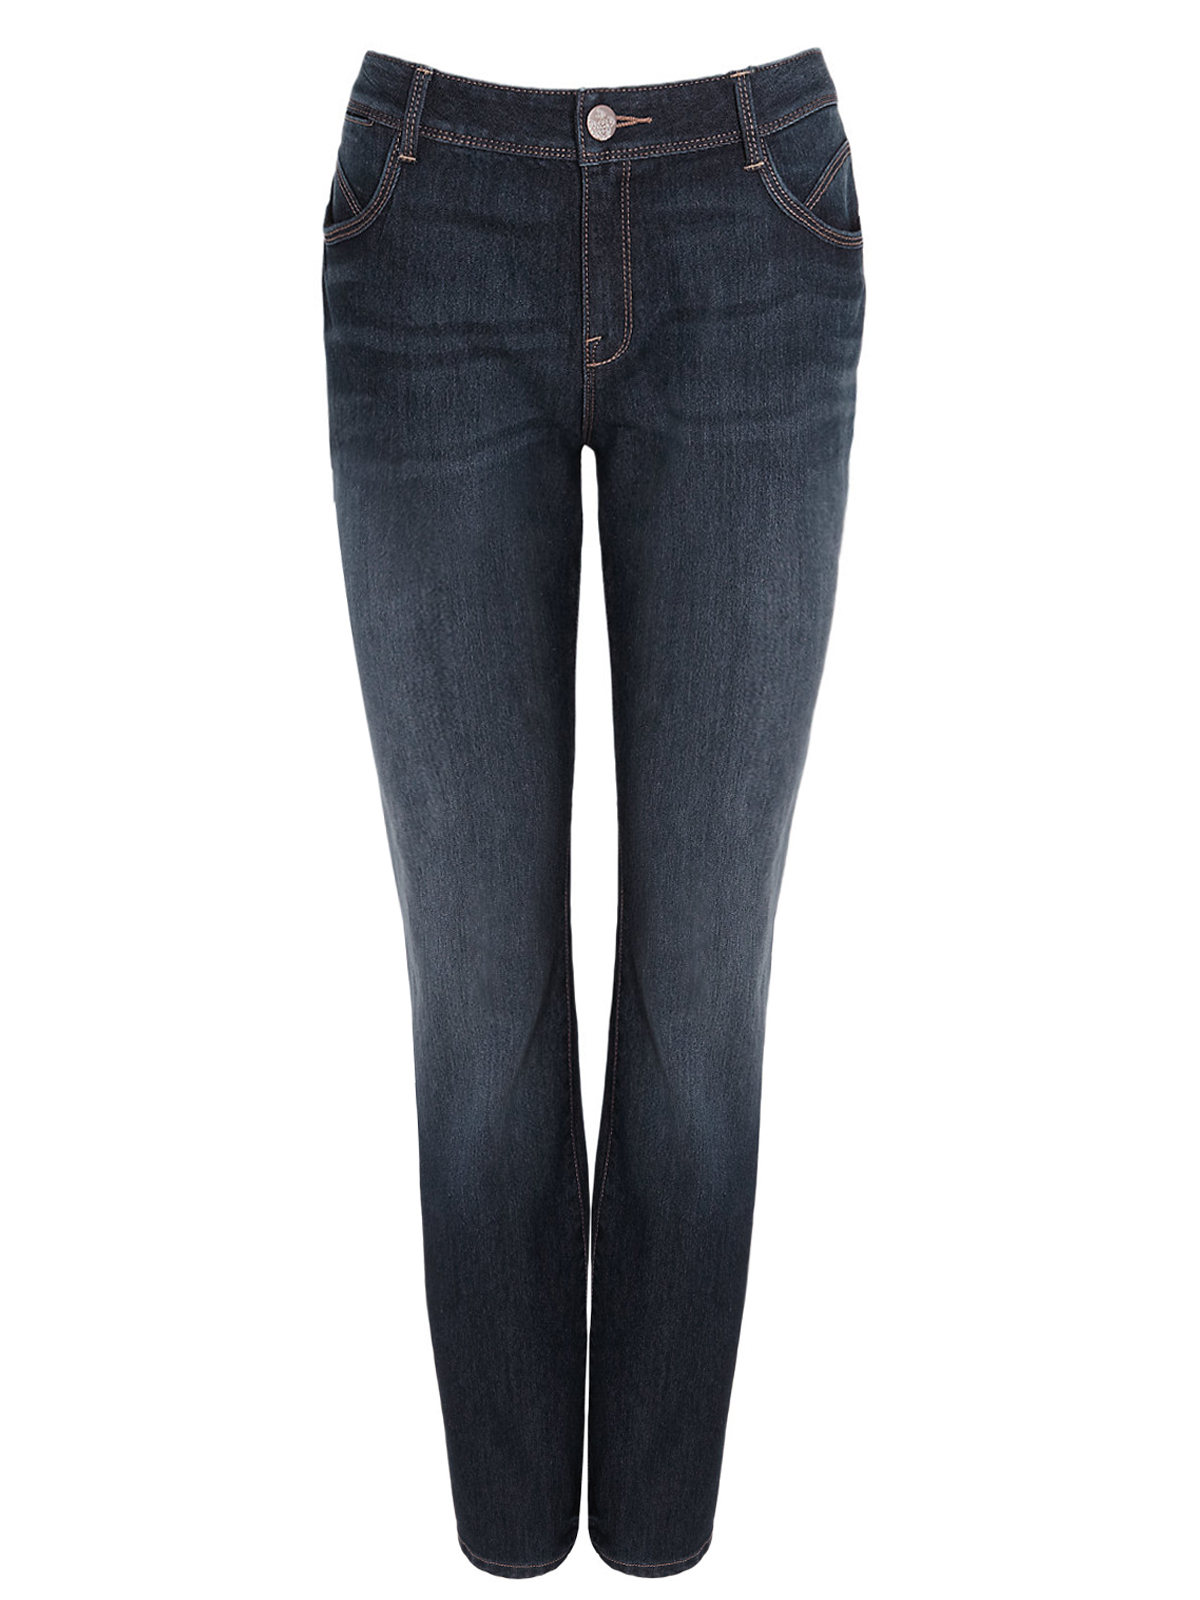 Marks and Spencer - - M&5 INDIGO Bum Lift Skinny Jeans - Size 16 to 18